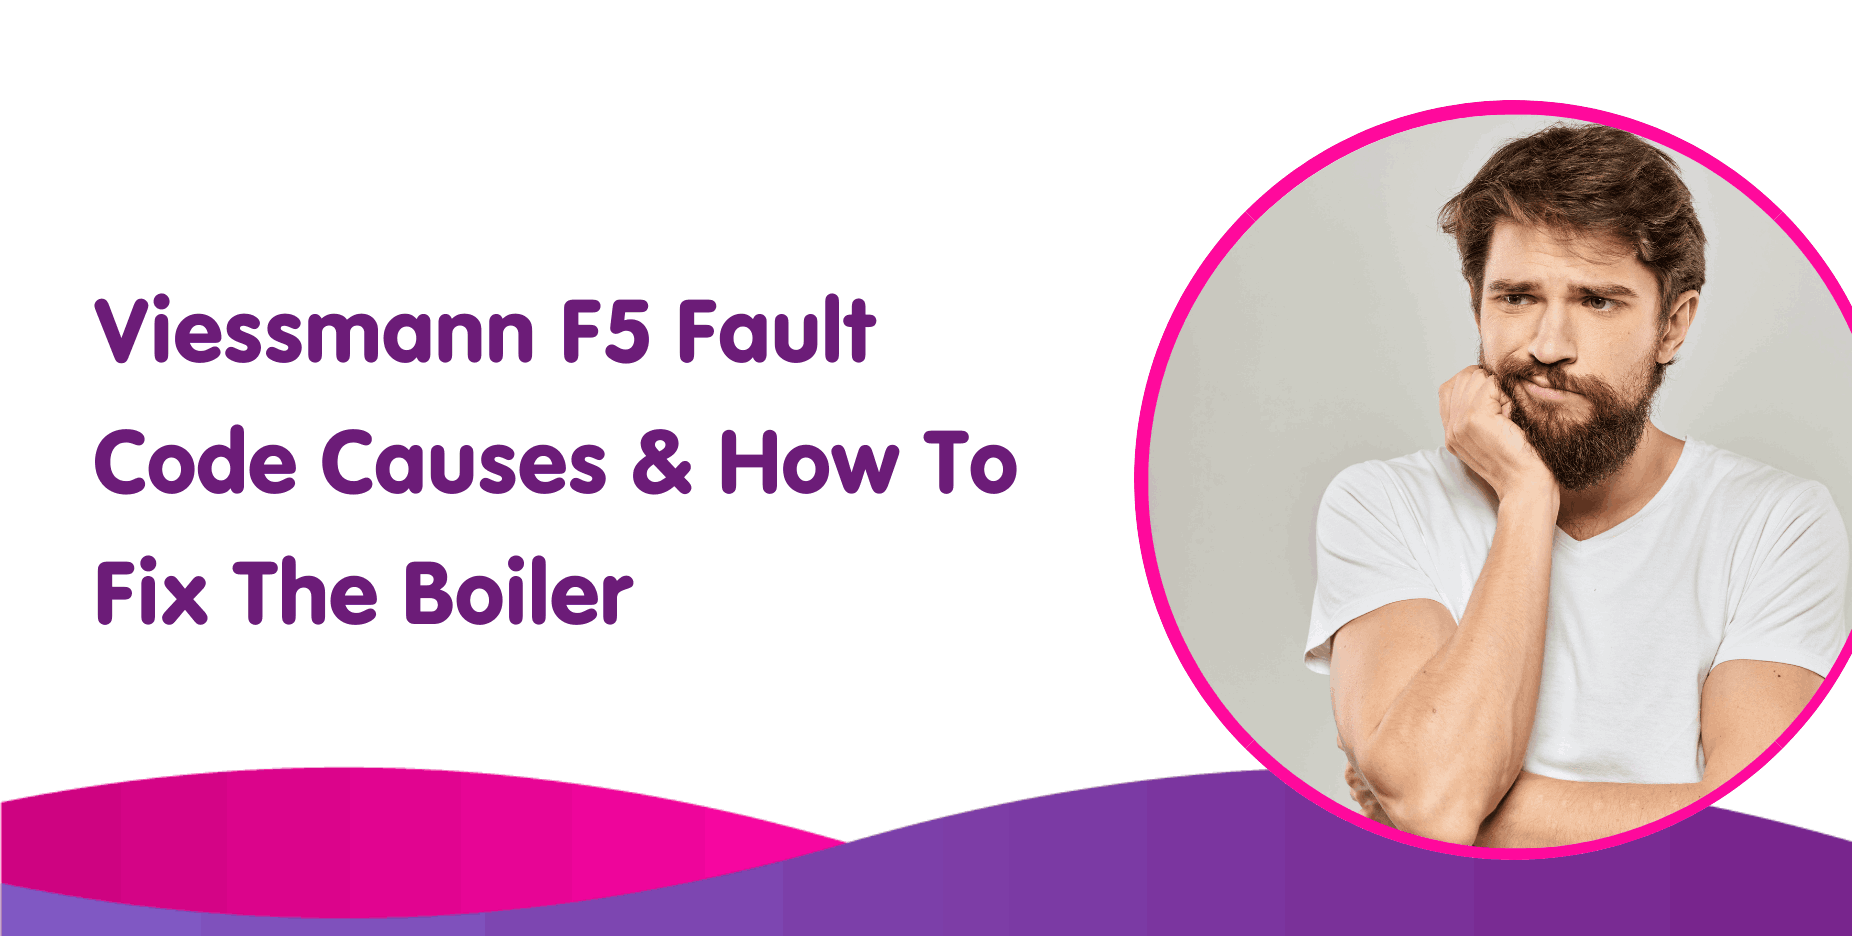 Viessmann F5 Fault Code Causes & How To Fix The Boiler